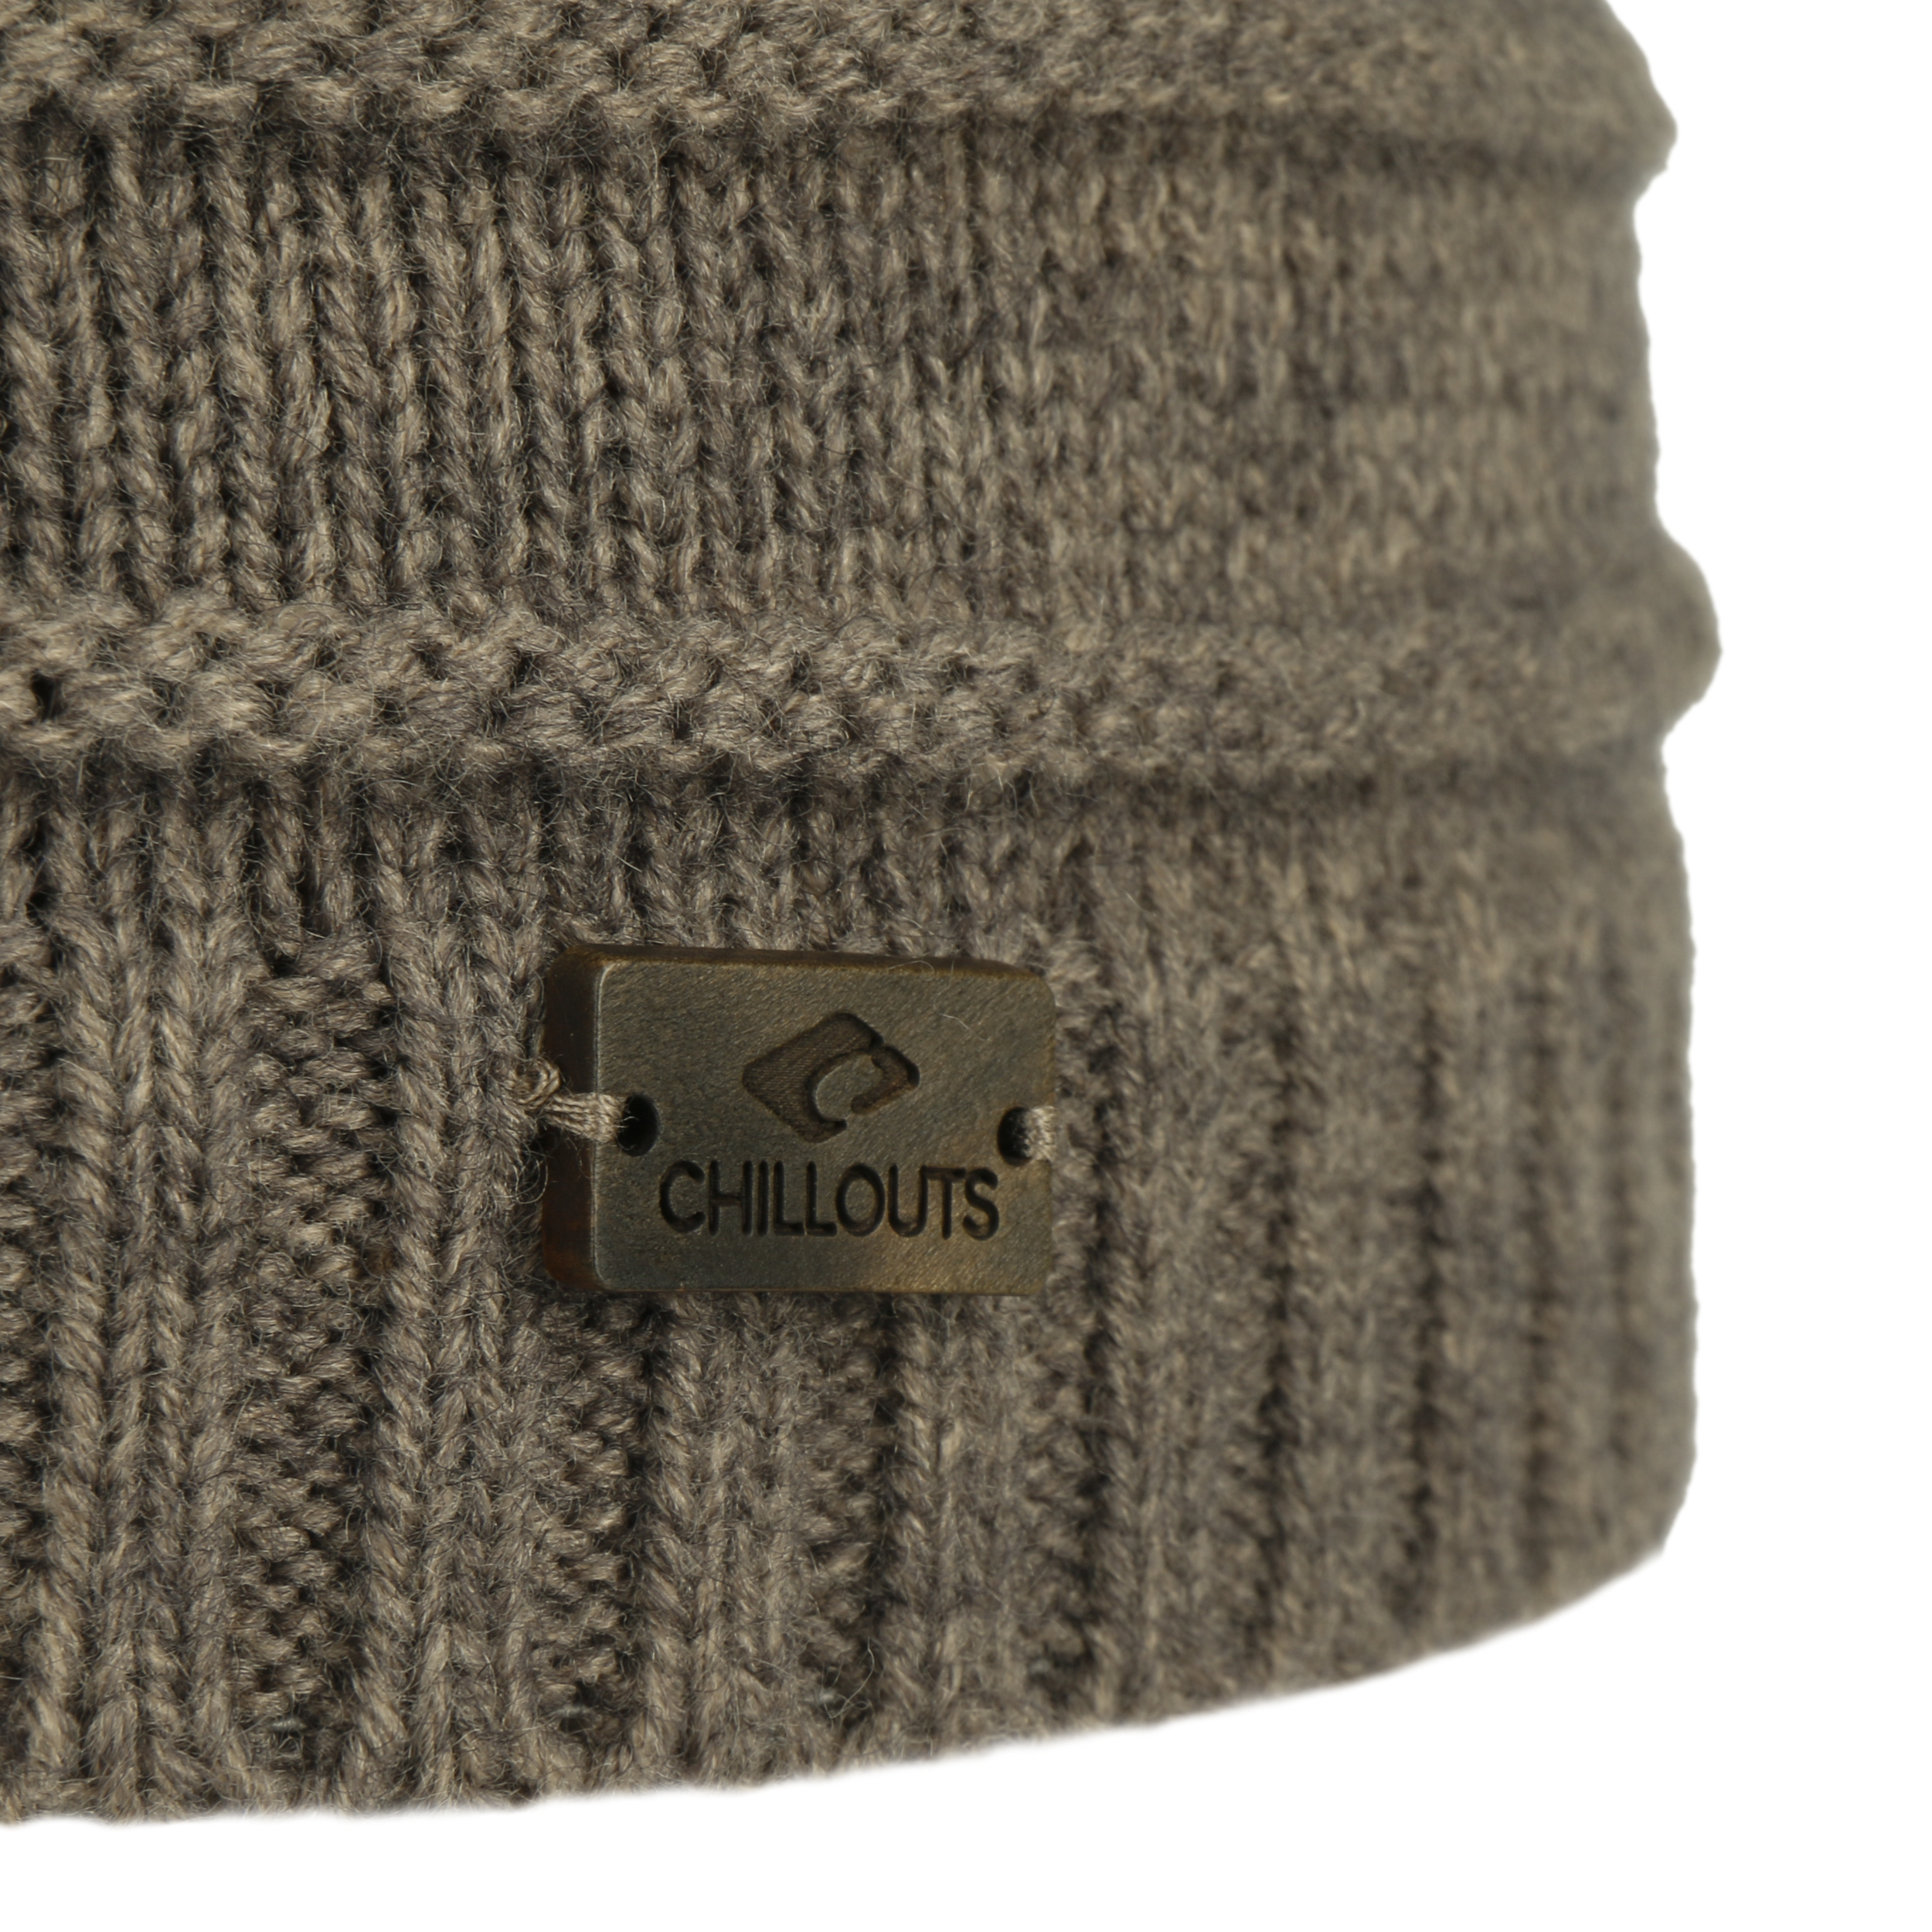 Arne Beanie Hat - 26,95 by € Chillouts